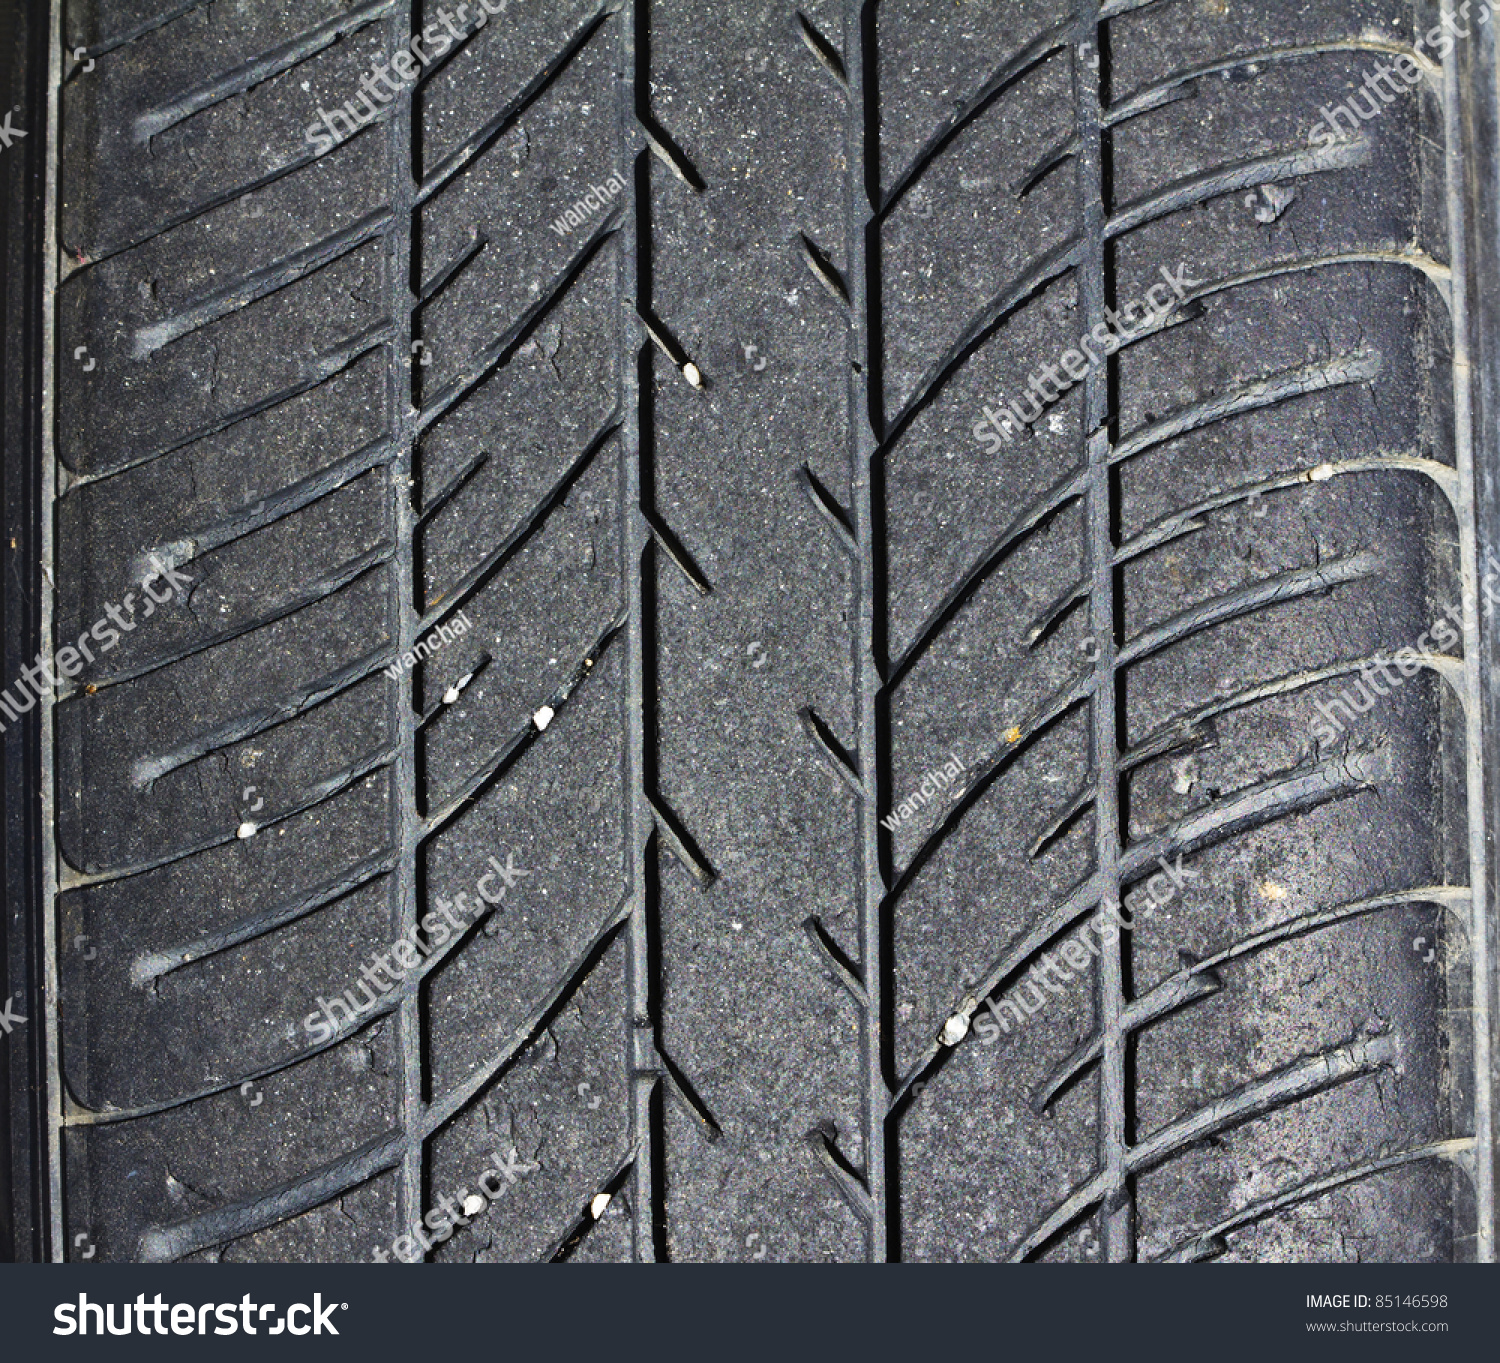 Close Old Tire Texture Stock Photo 85146598 - Shutterstock